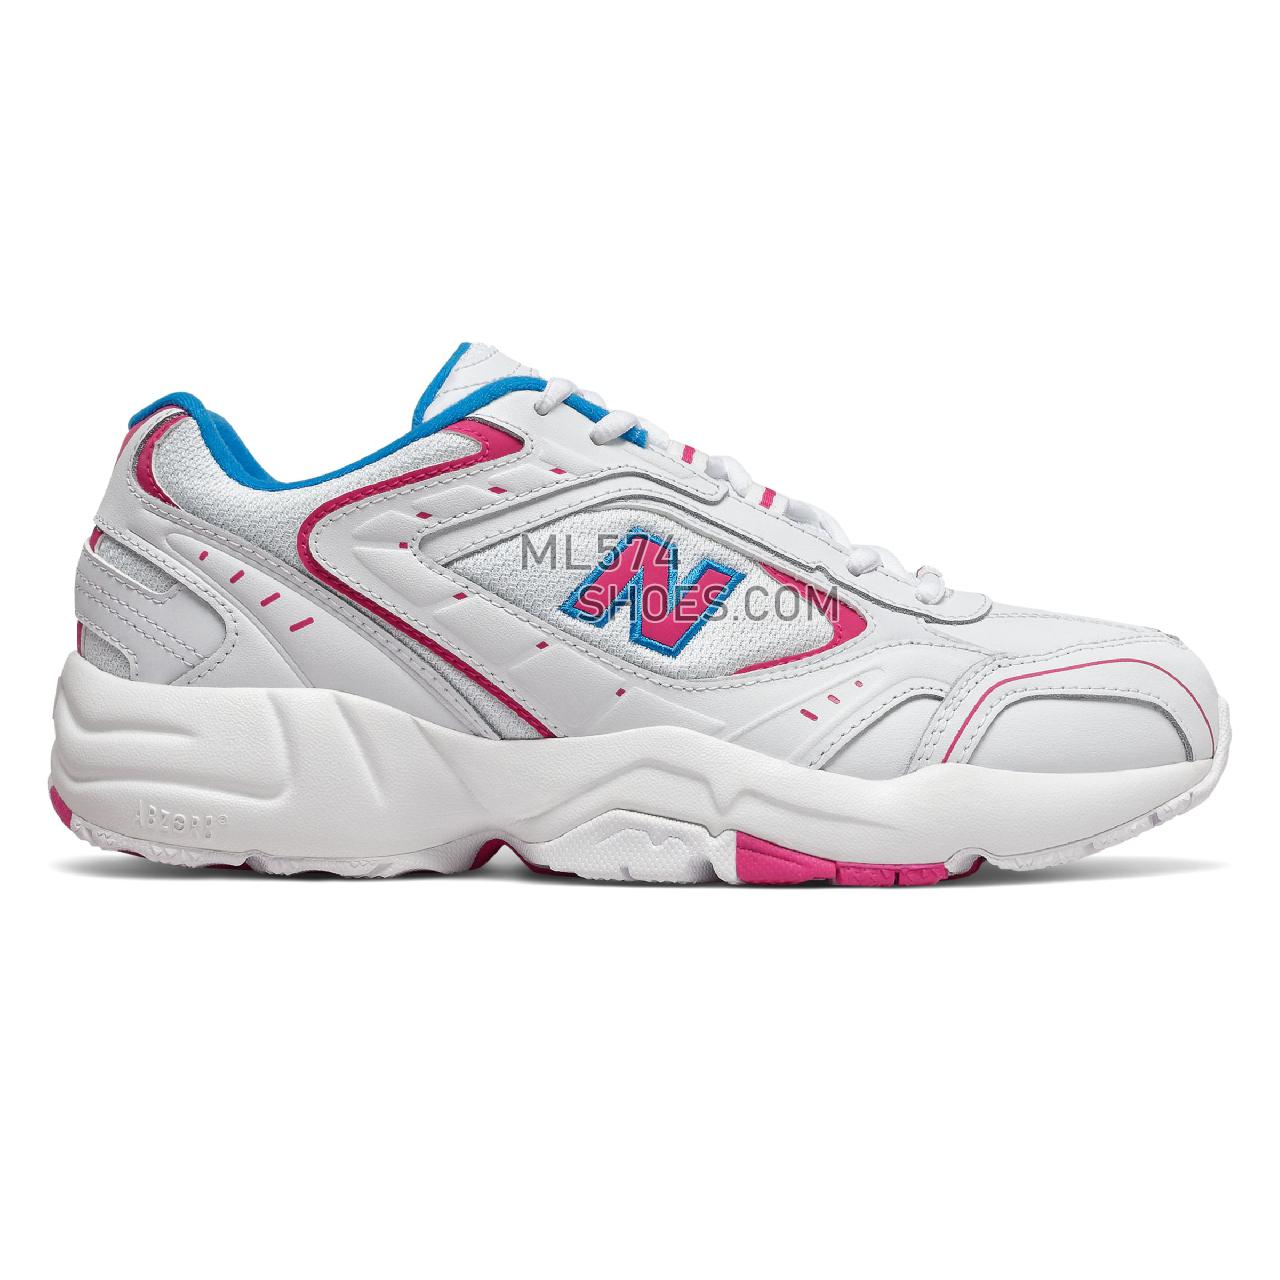 New Balance 452 - Men's 452 Training - White with Exuberant Pink and Vision Blue - MX452SC